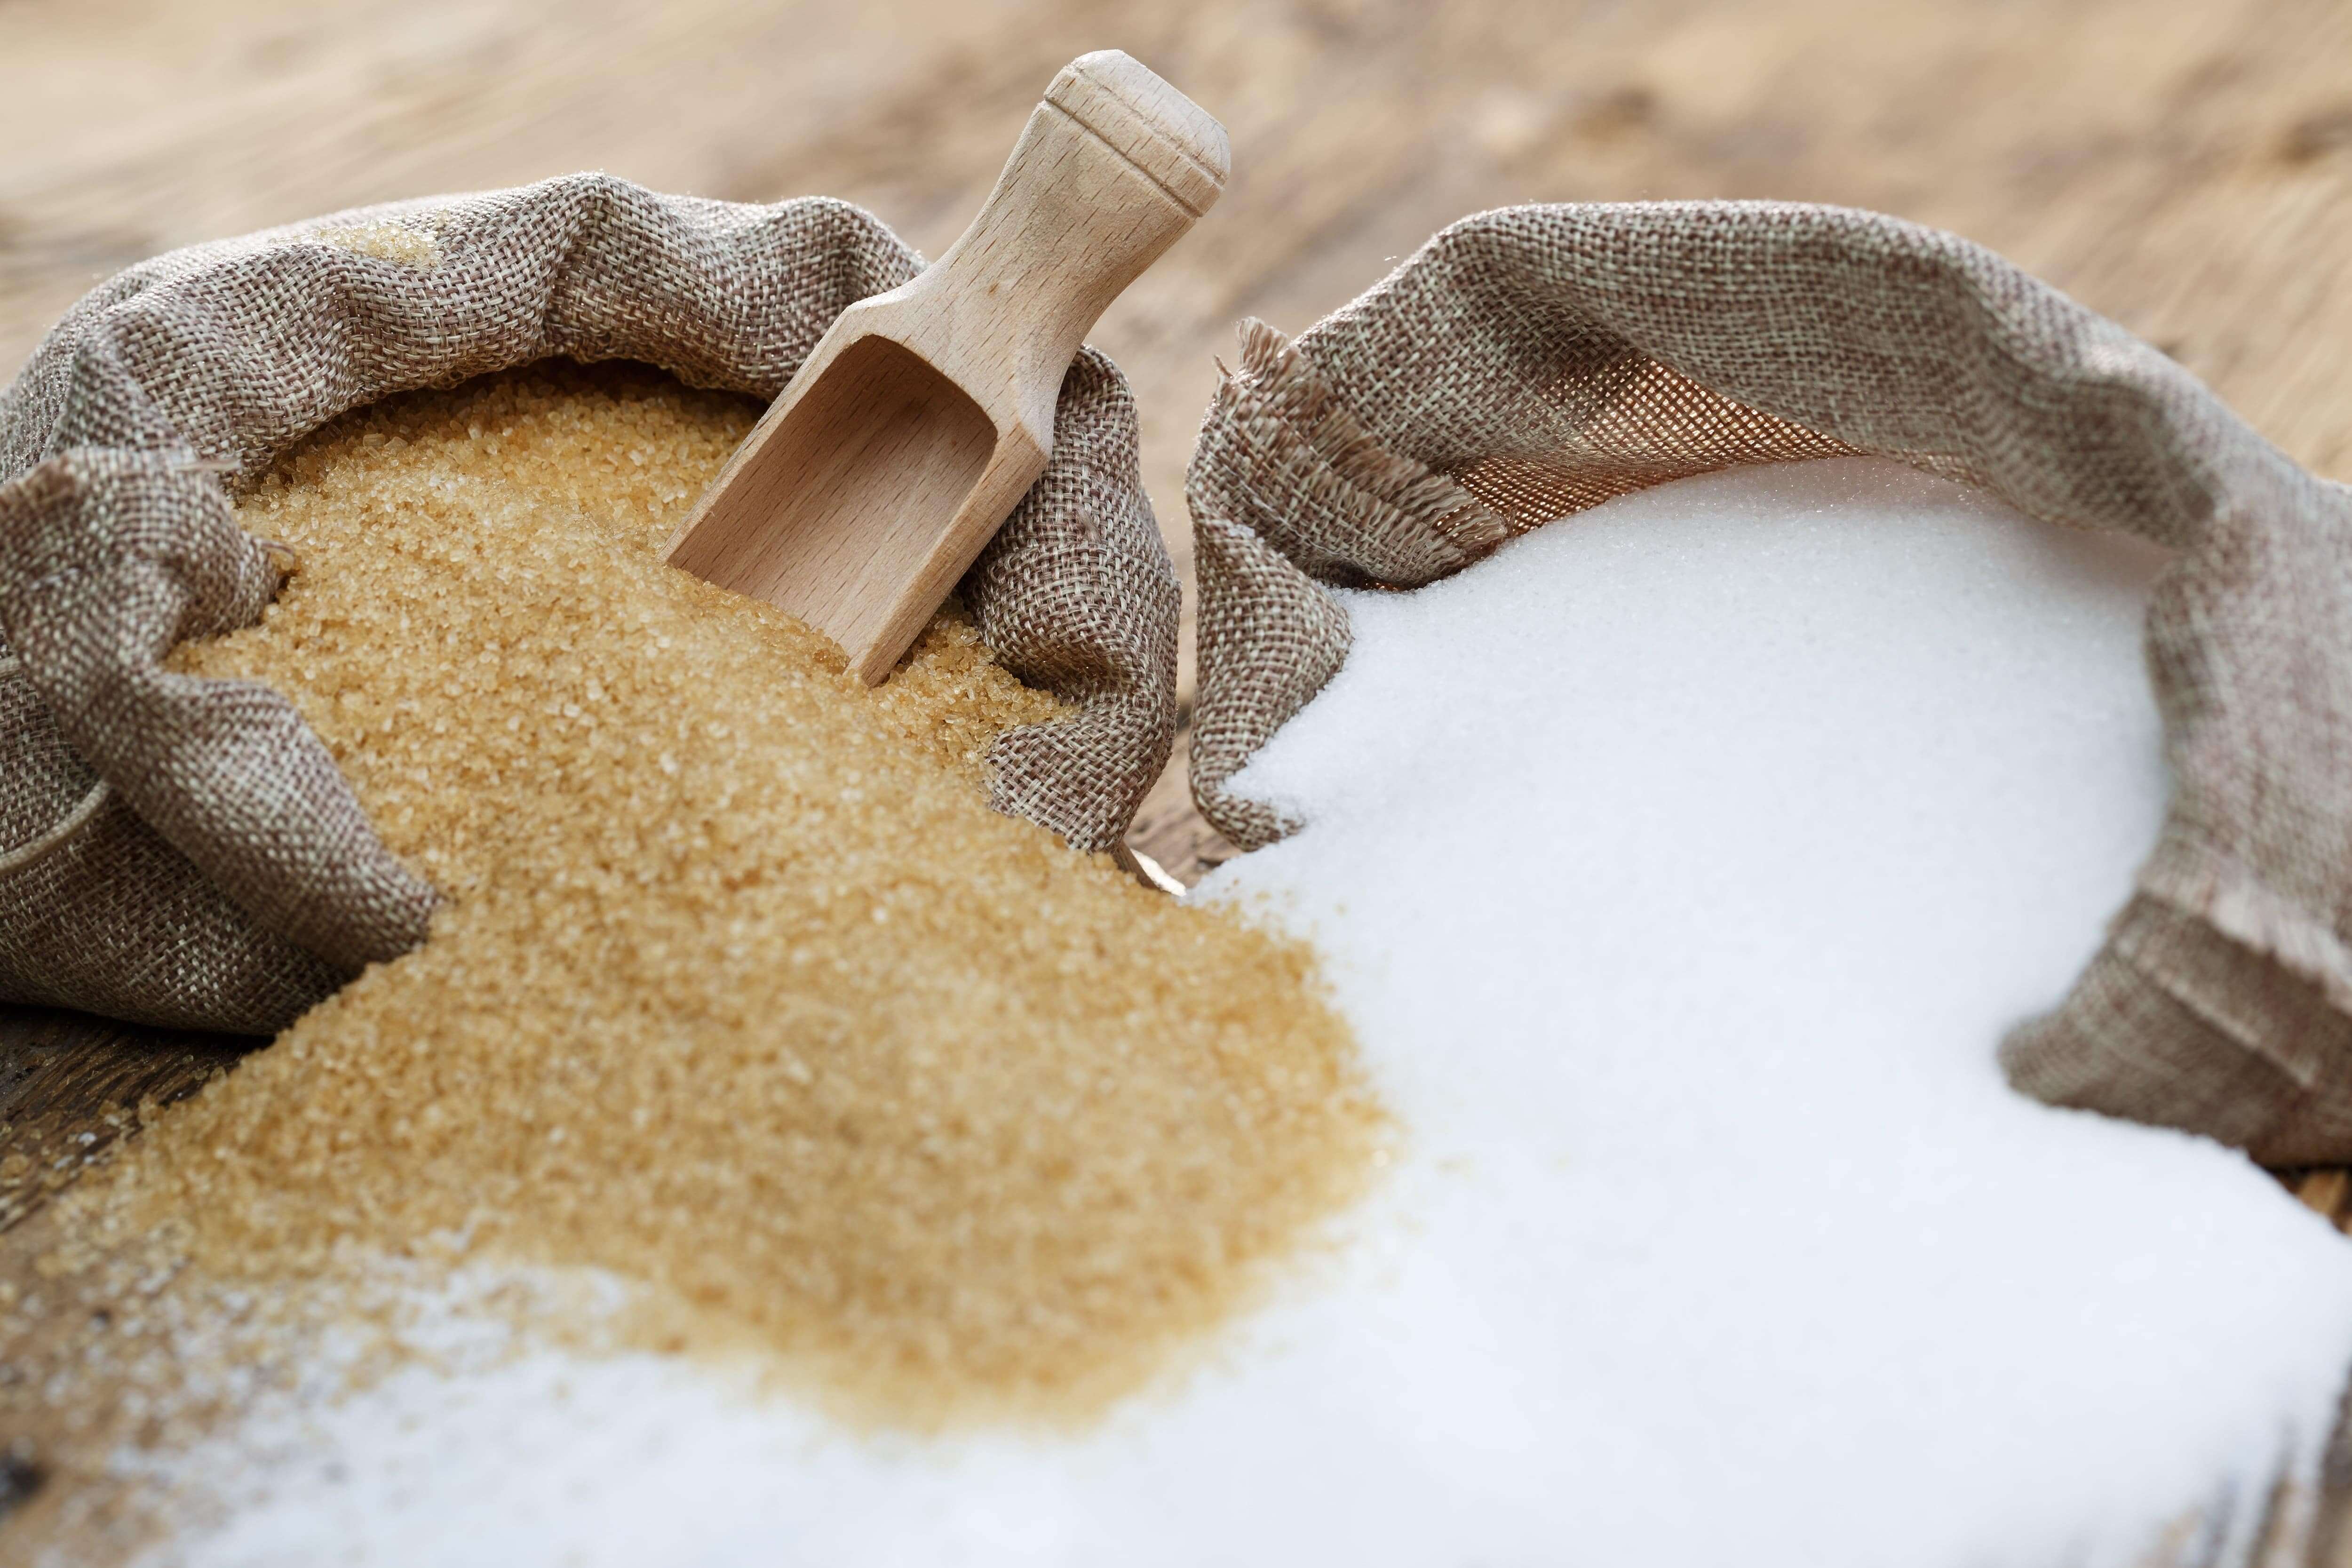 Indonesia Sugar imports to decline due to increasing production levels